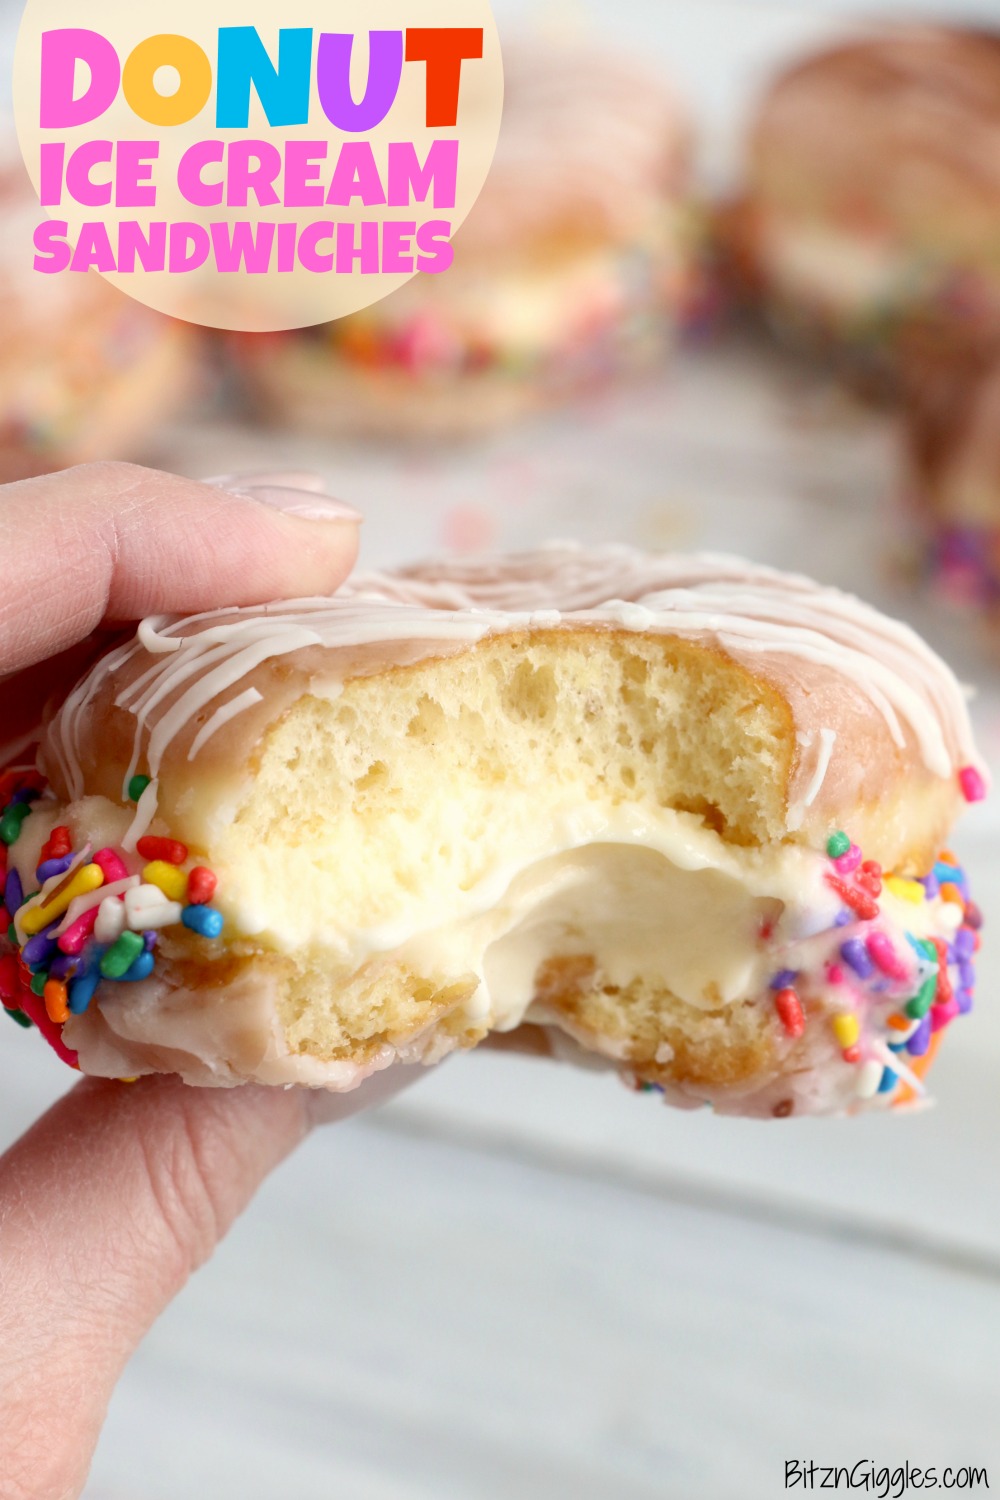 Holding a Donut Ice Cream Sandwich with a Bite Out